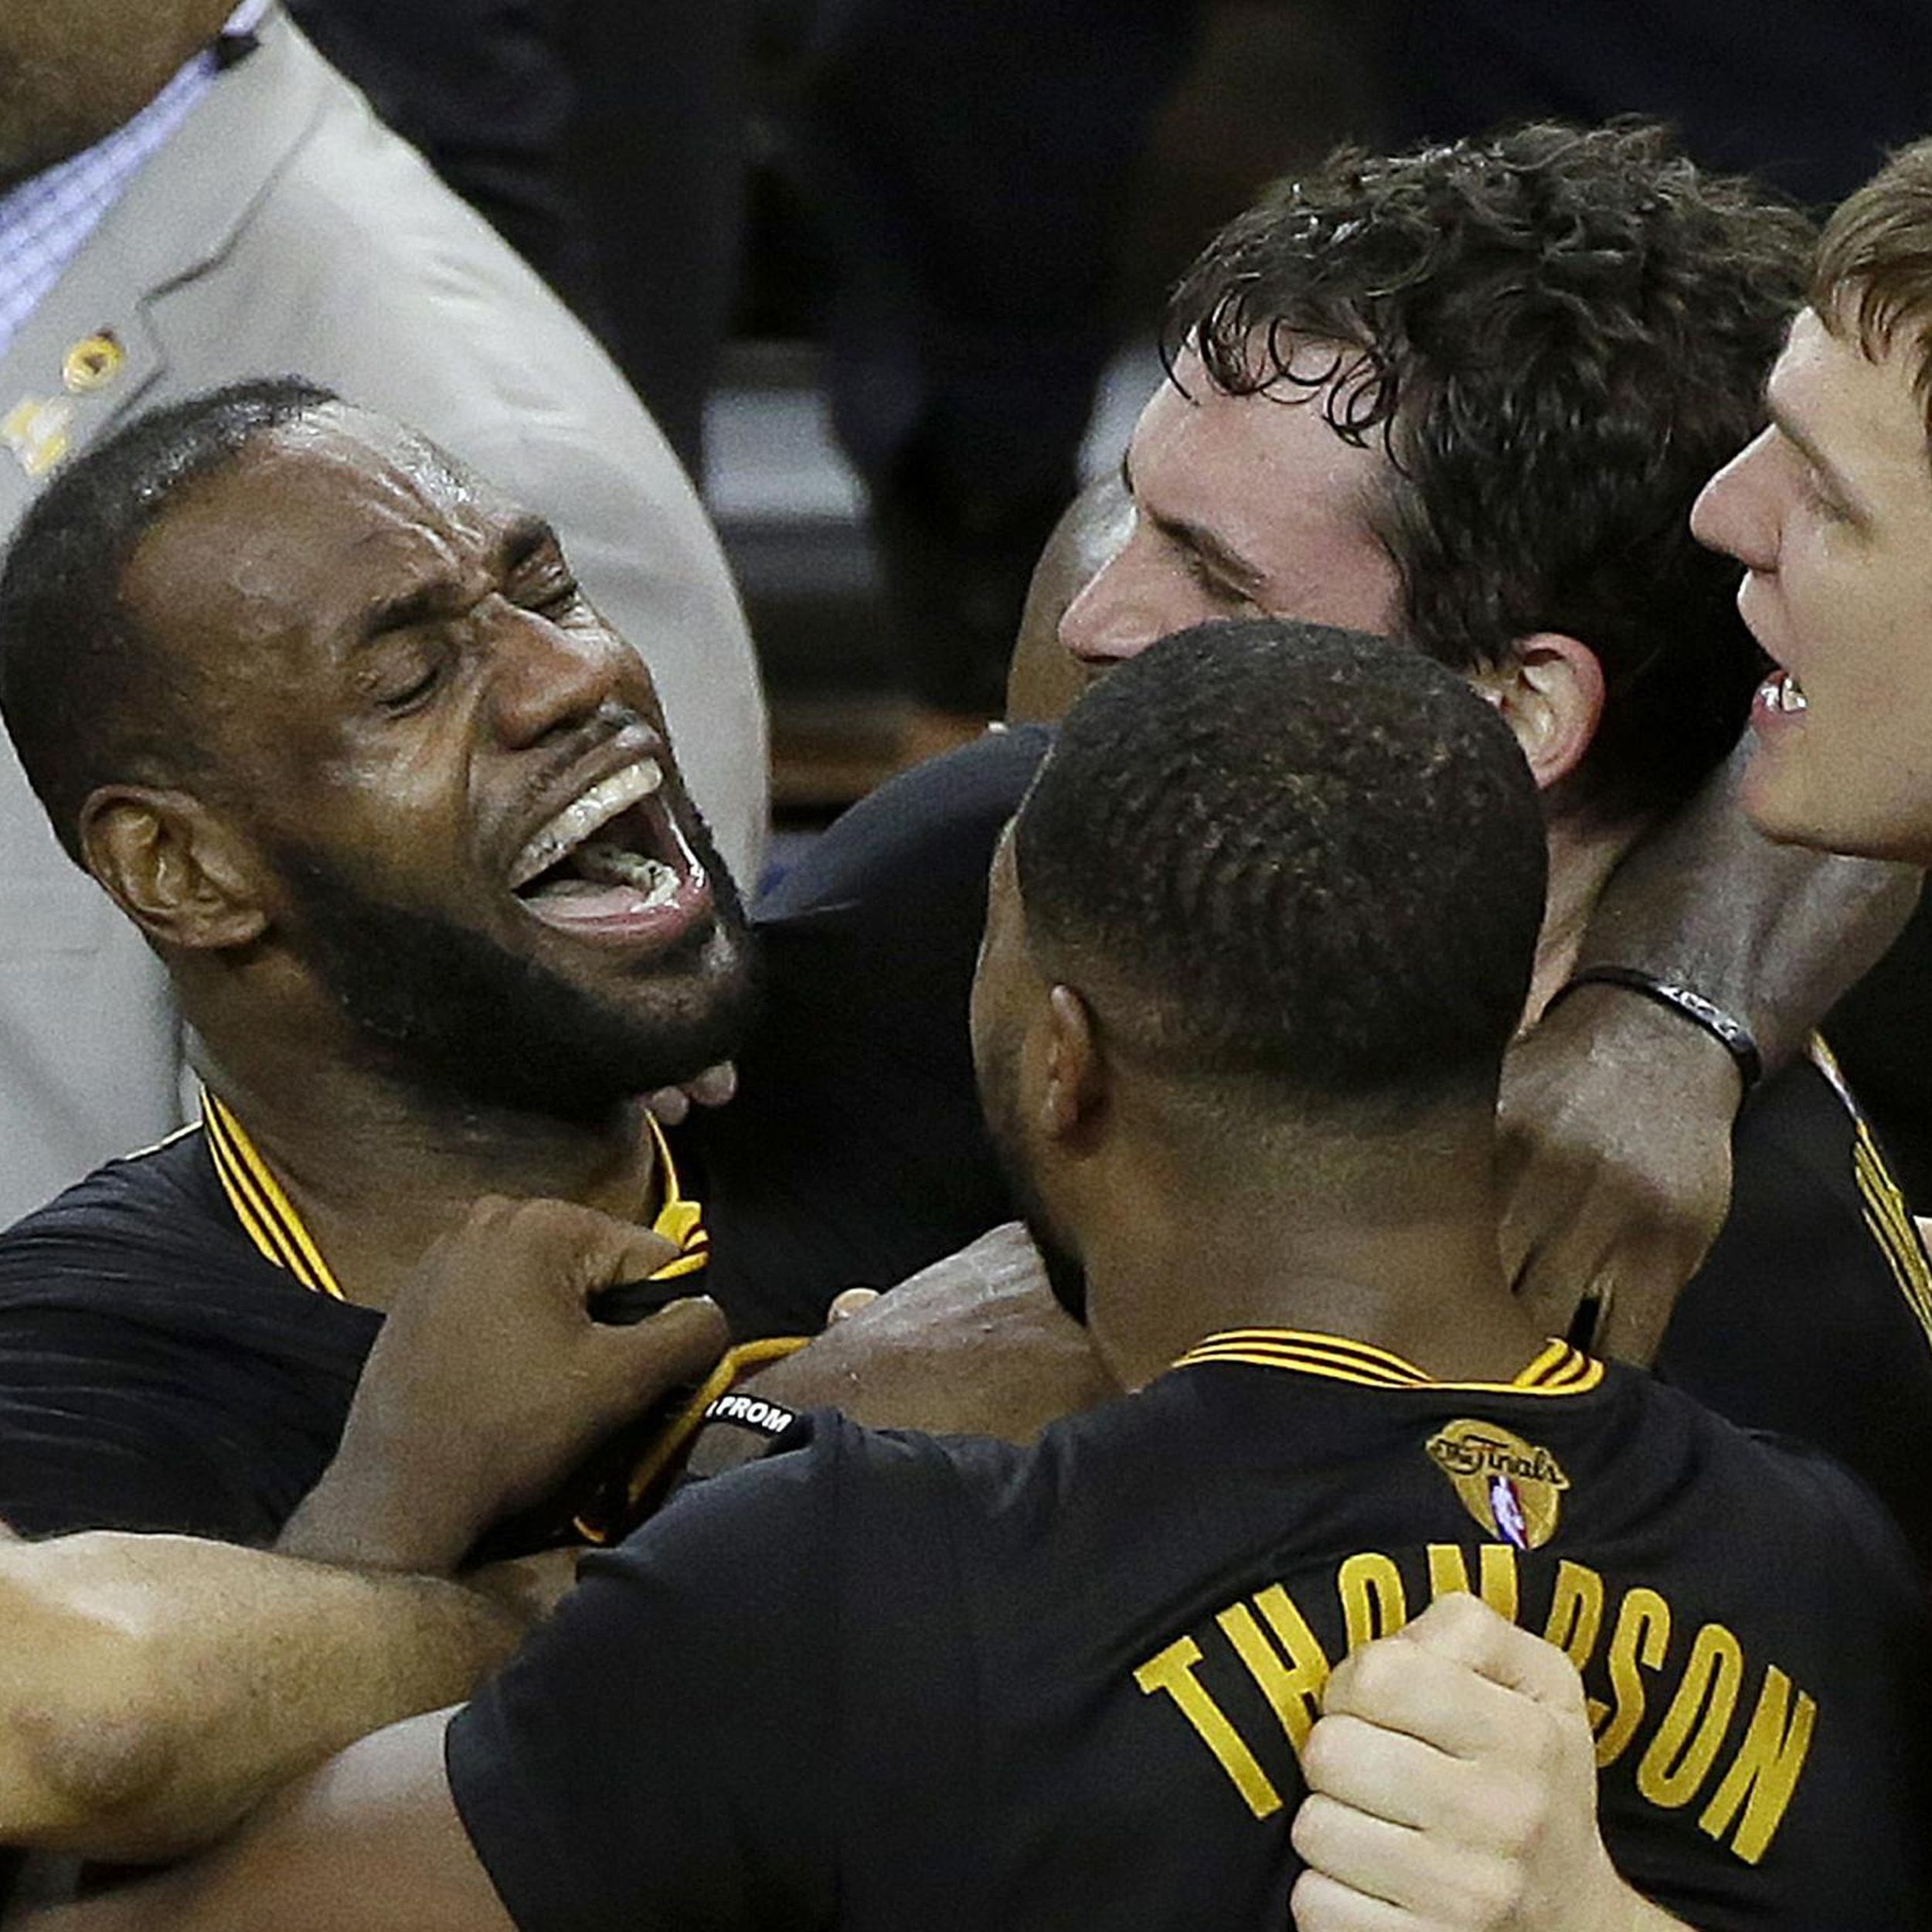 Home court: LeBron savors special All-Star trip back to Ohio